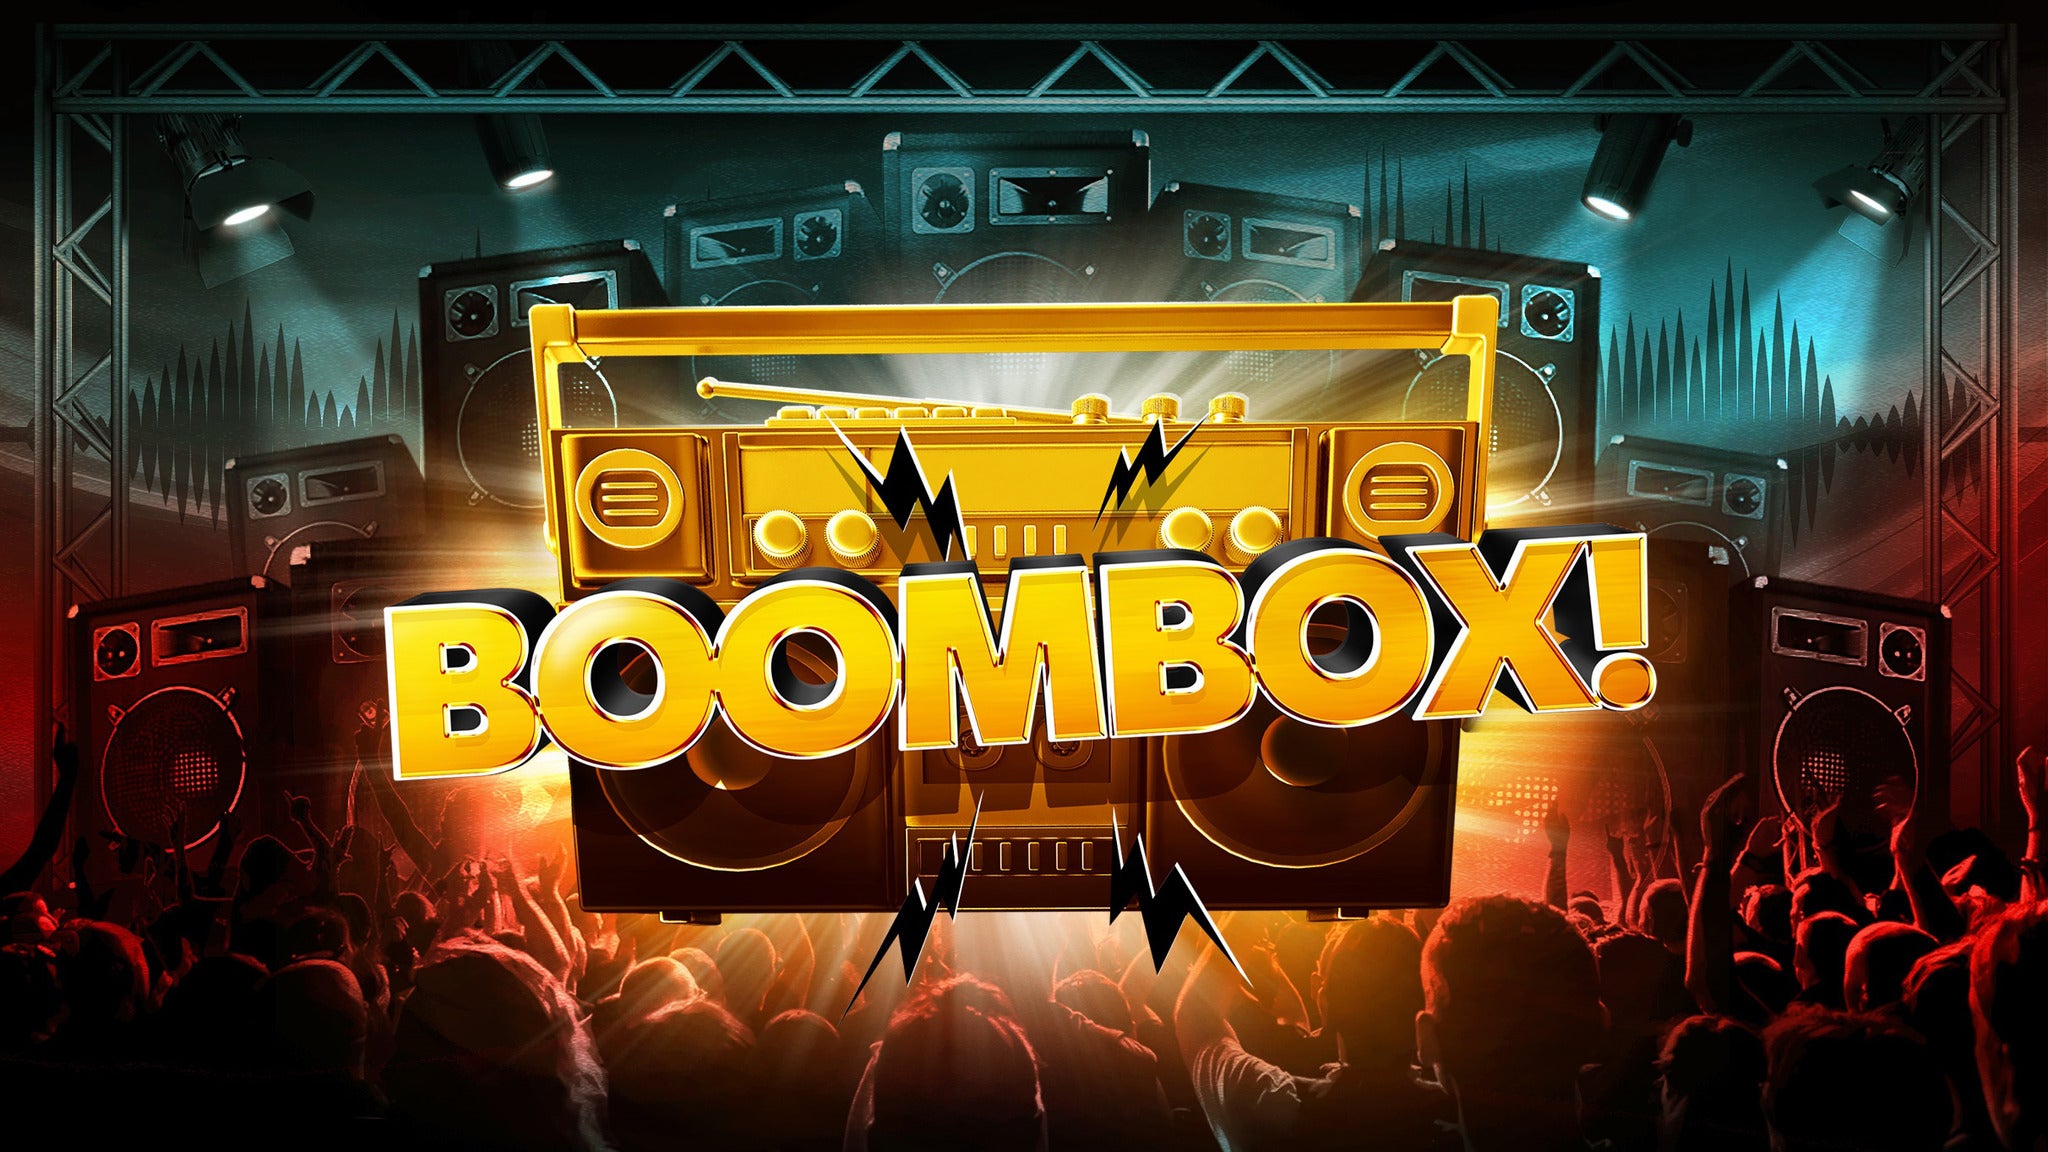 BoomBox: Western Voodoo Tour in Detroit promo photo for Citi® Cardmember presale offer code